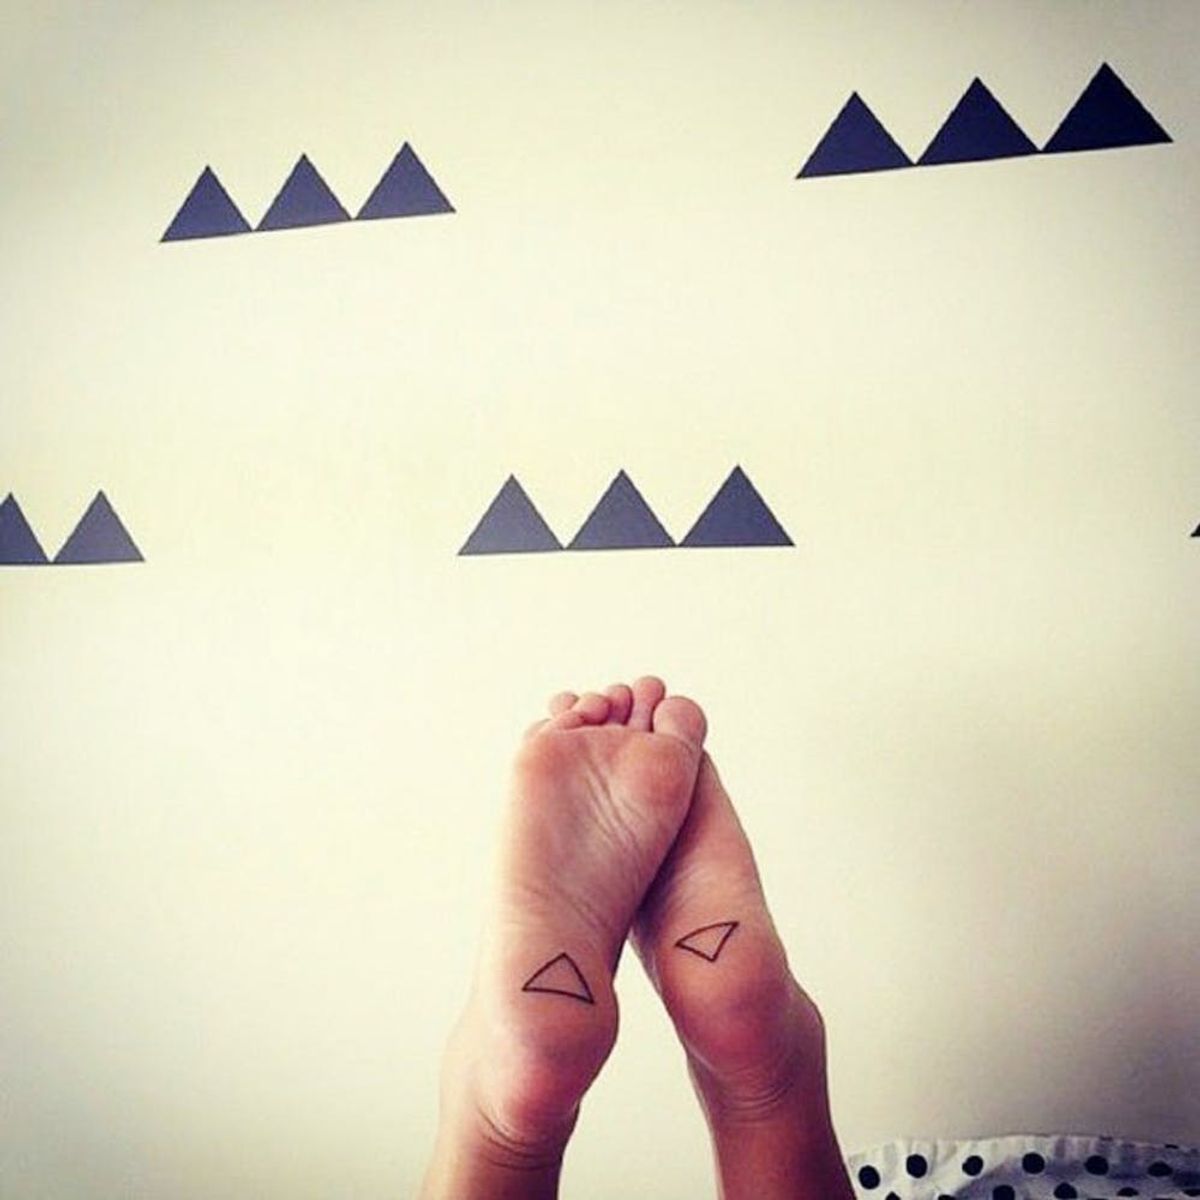 16 Tiny Foot Tattoos You’ll Be Obsessing Over